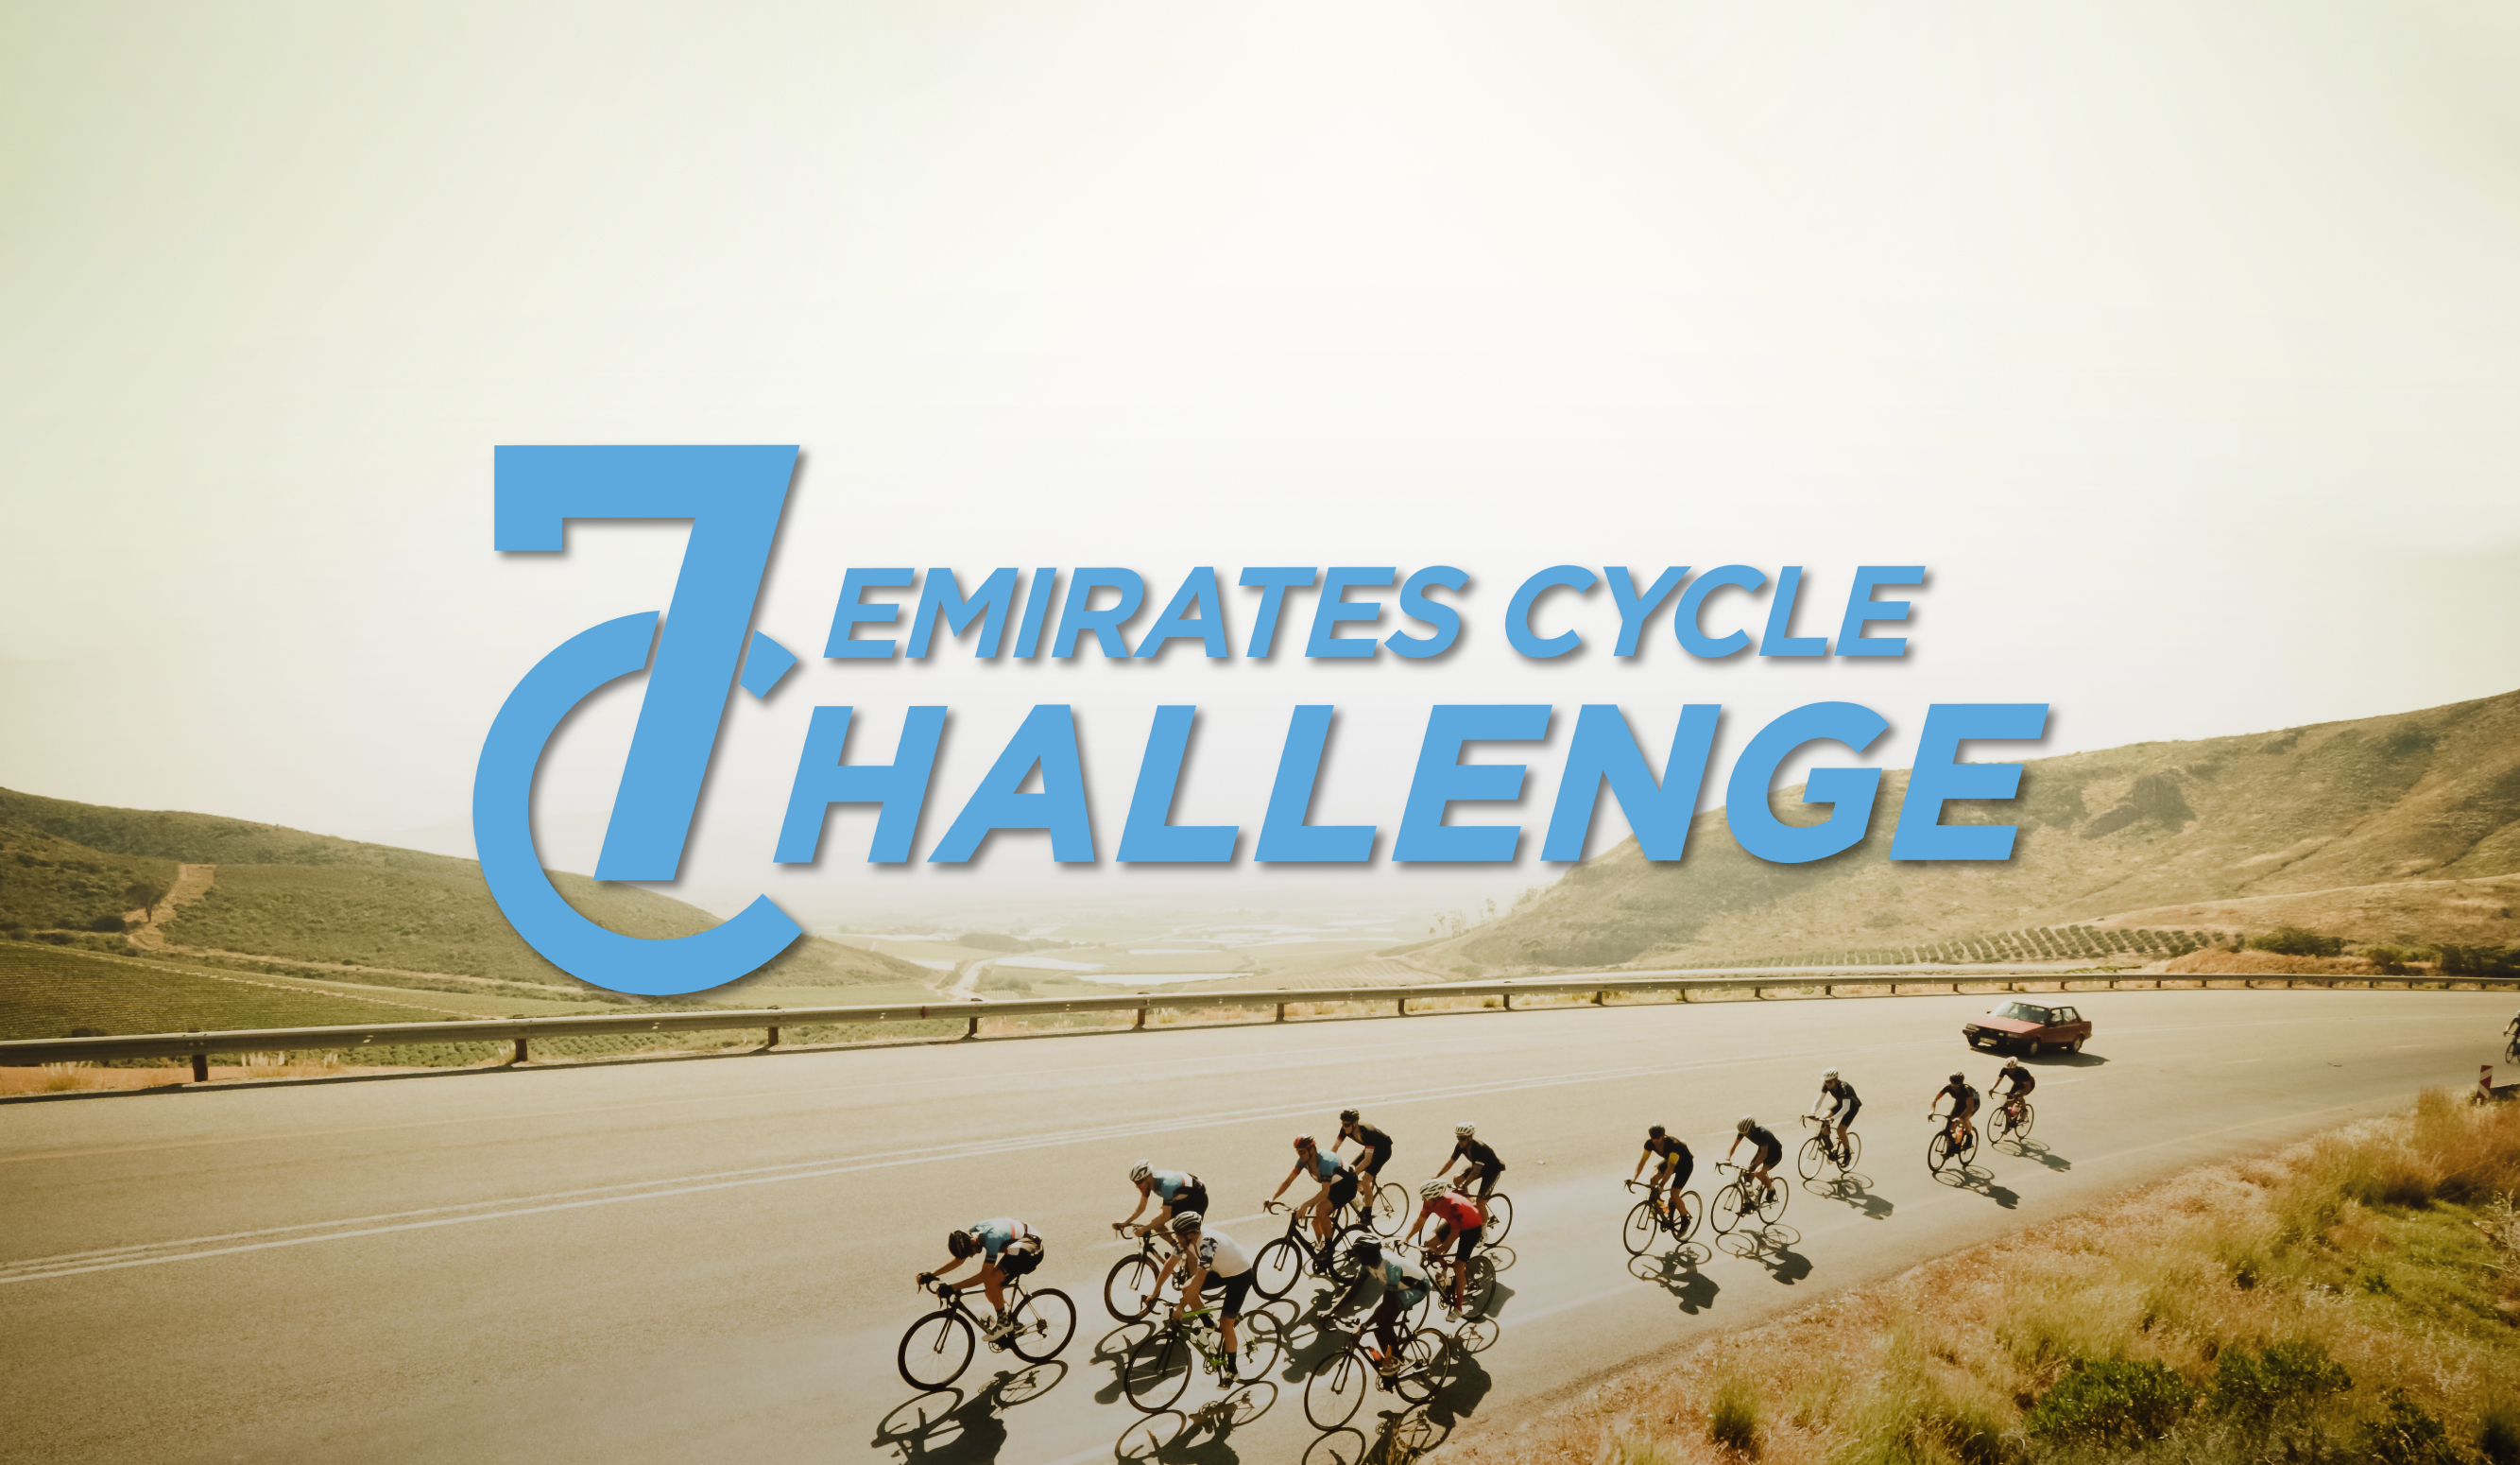 Rashid Center for People of Determination and The First Group join hands to launch ‘The First Group 7 Emirates Cycle Challenge’ in celebration of UAE’s 50th Jubilee